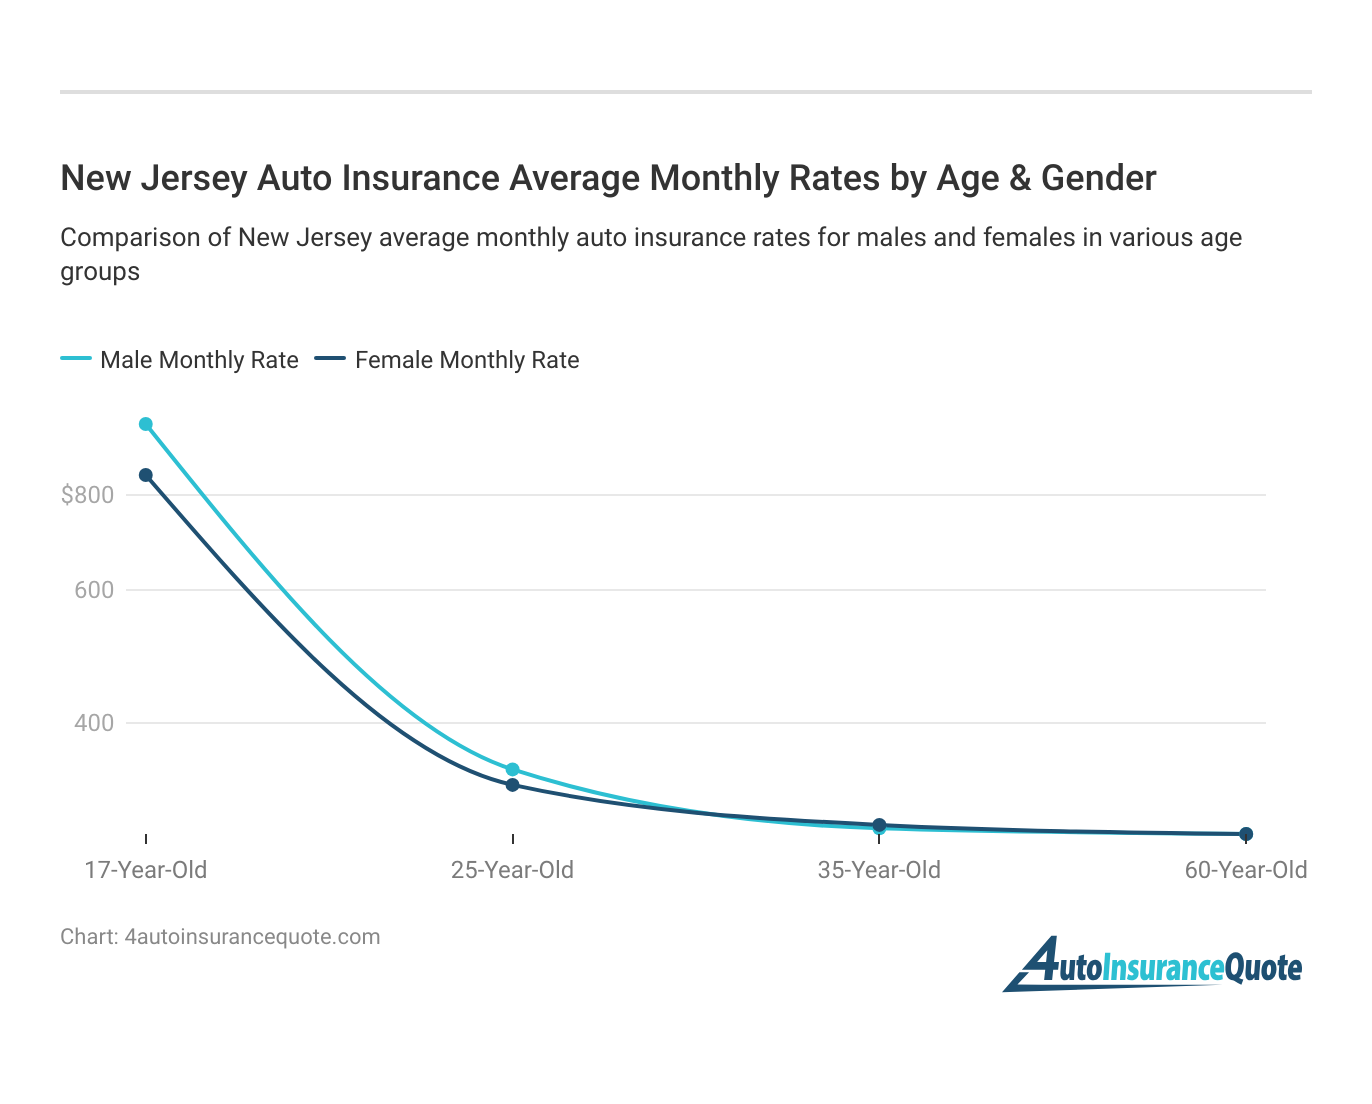 <h3>New Jersey Auto Insurance Average Monthly Rates by Age & Gender</h3>